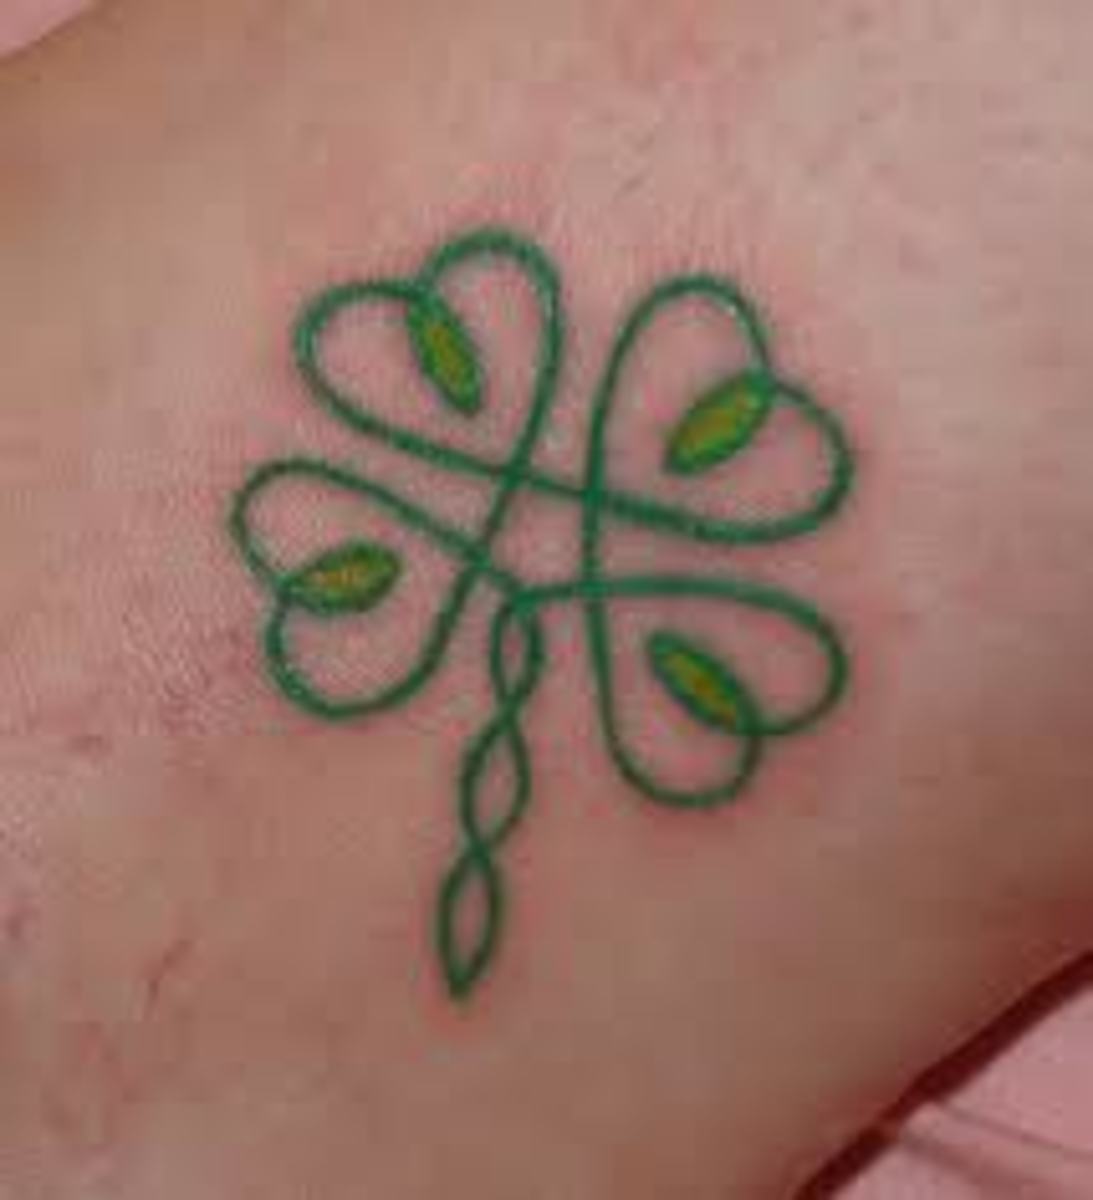 Four Leaf Clover Tattoo Designs And Meanings; Four Leaf Clover Tattoo Ideas  - HubPages